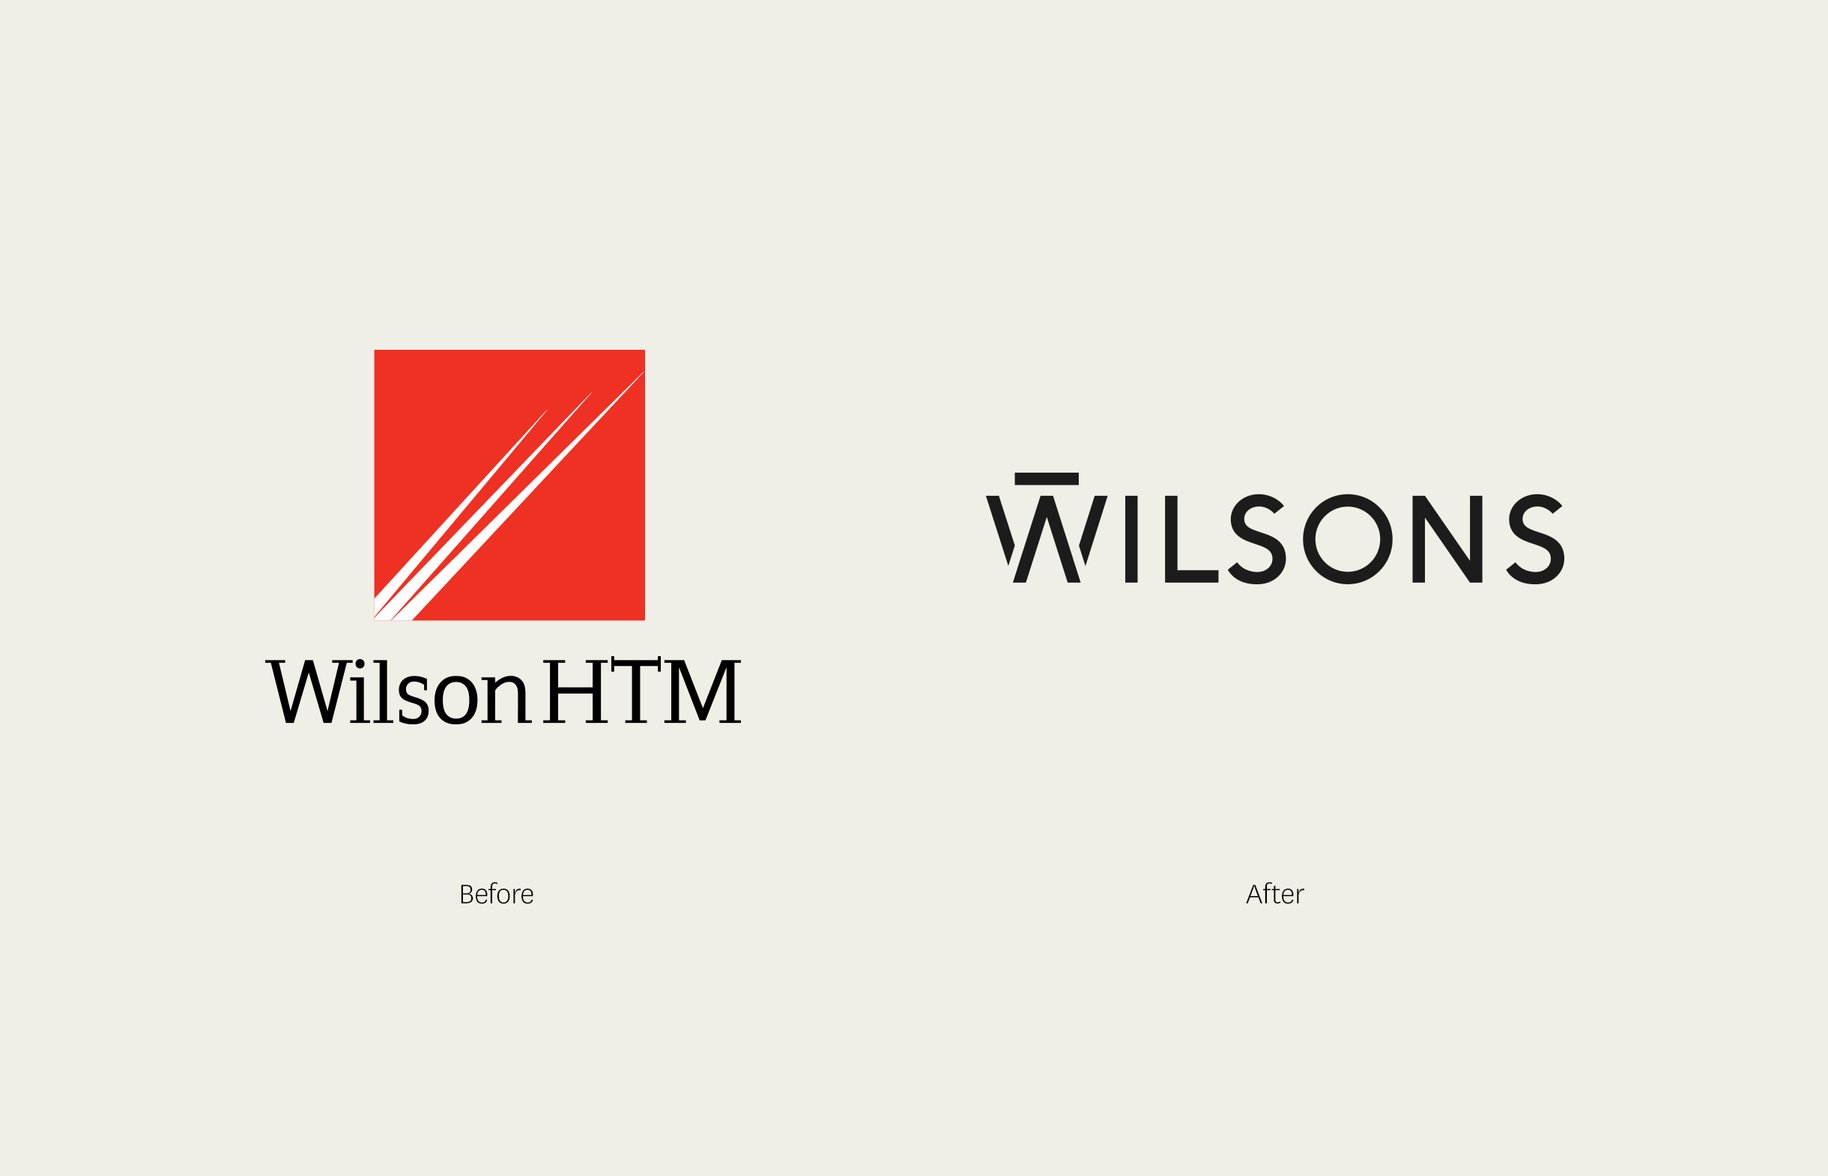 Wilsons Before & After Comparison